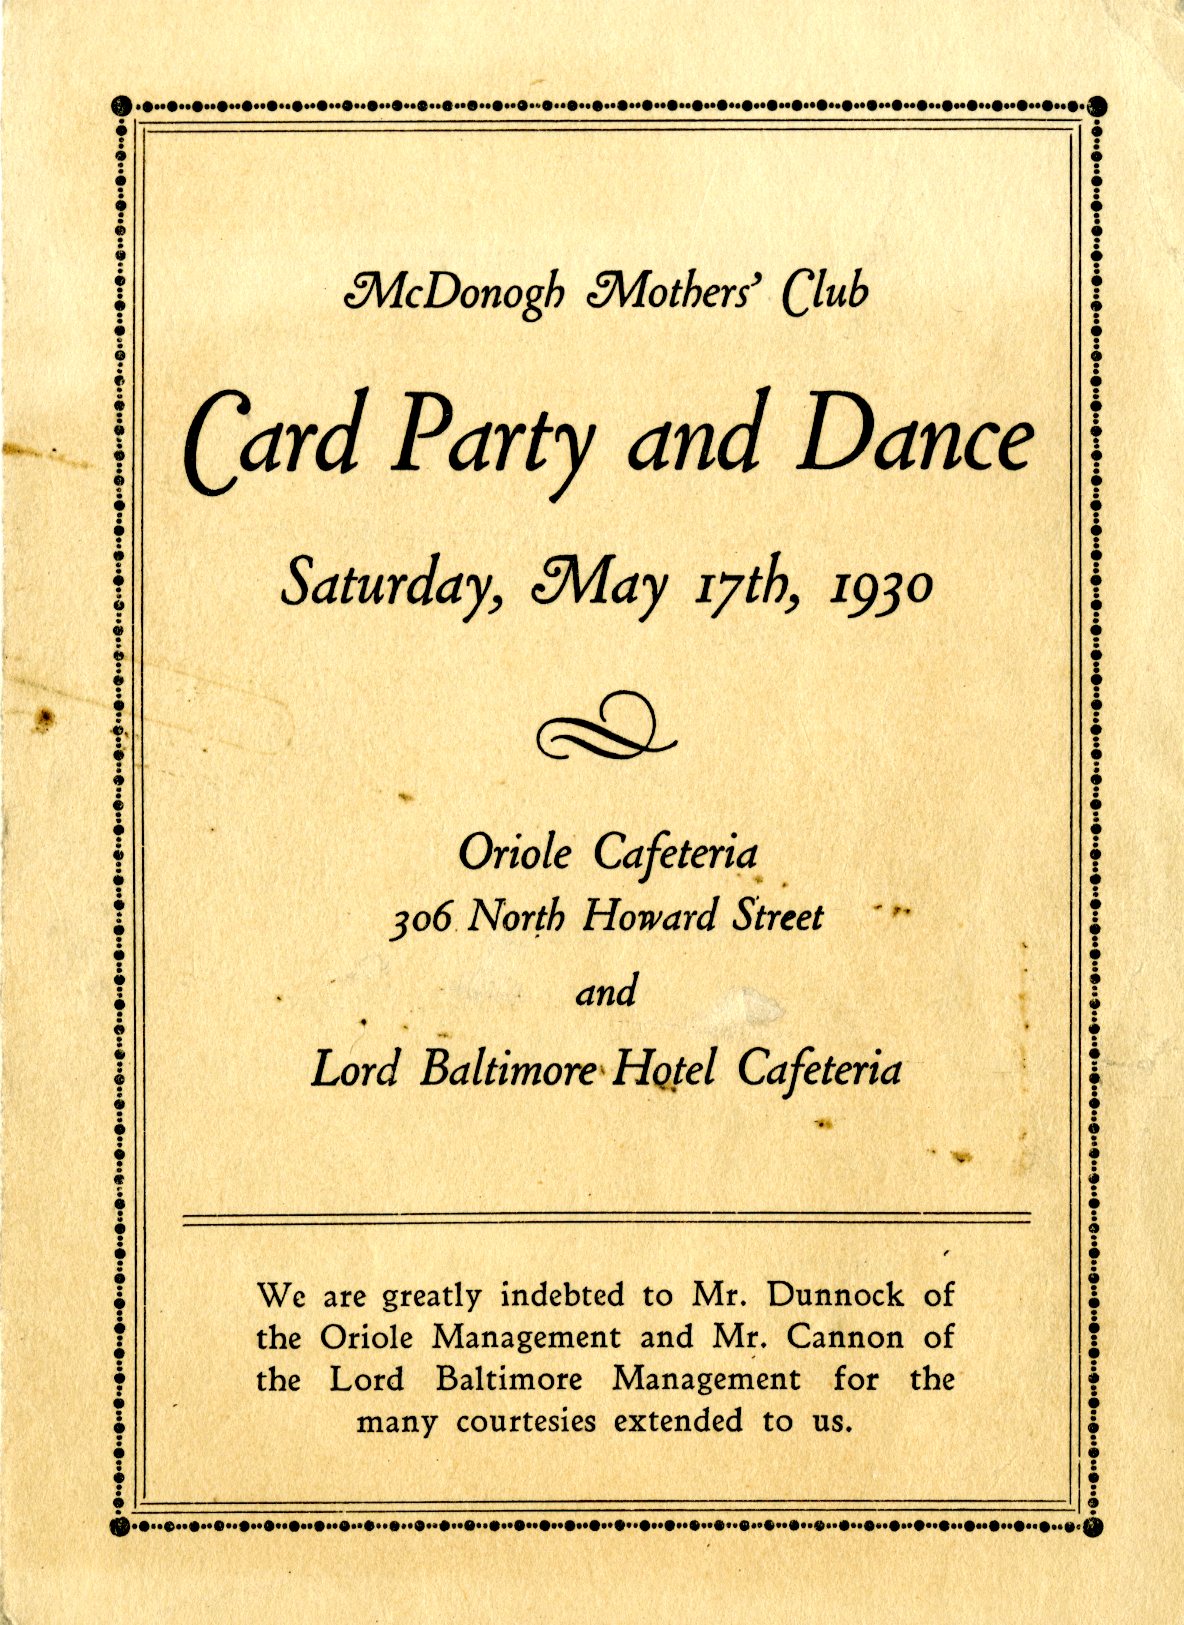 McDonogh Mothers Club Card Party and Dance Program